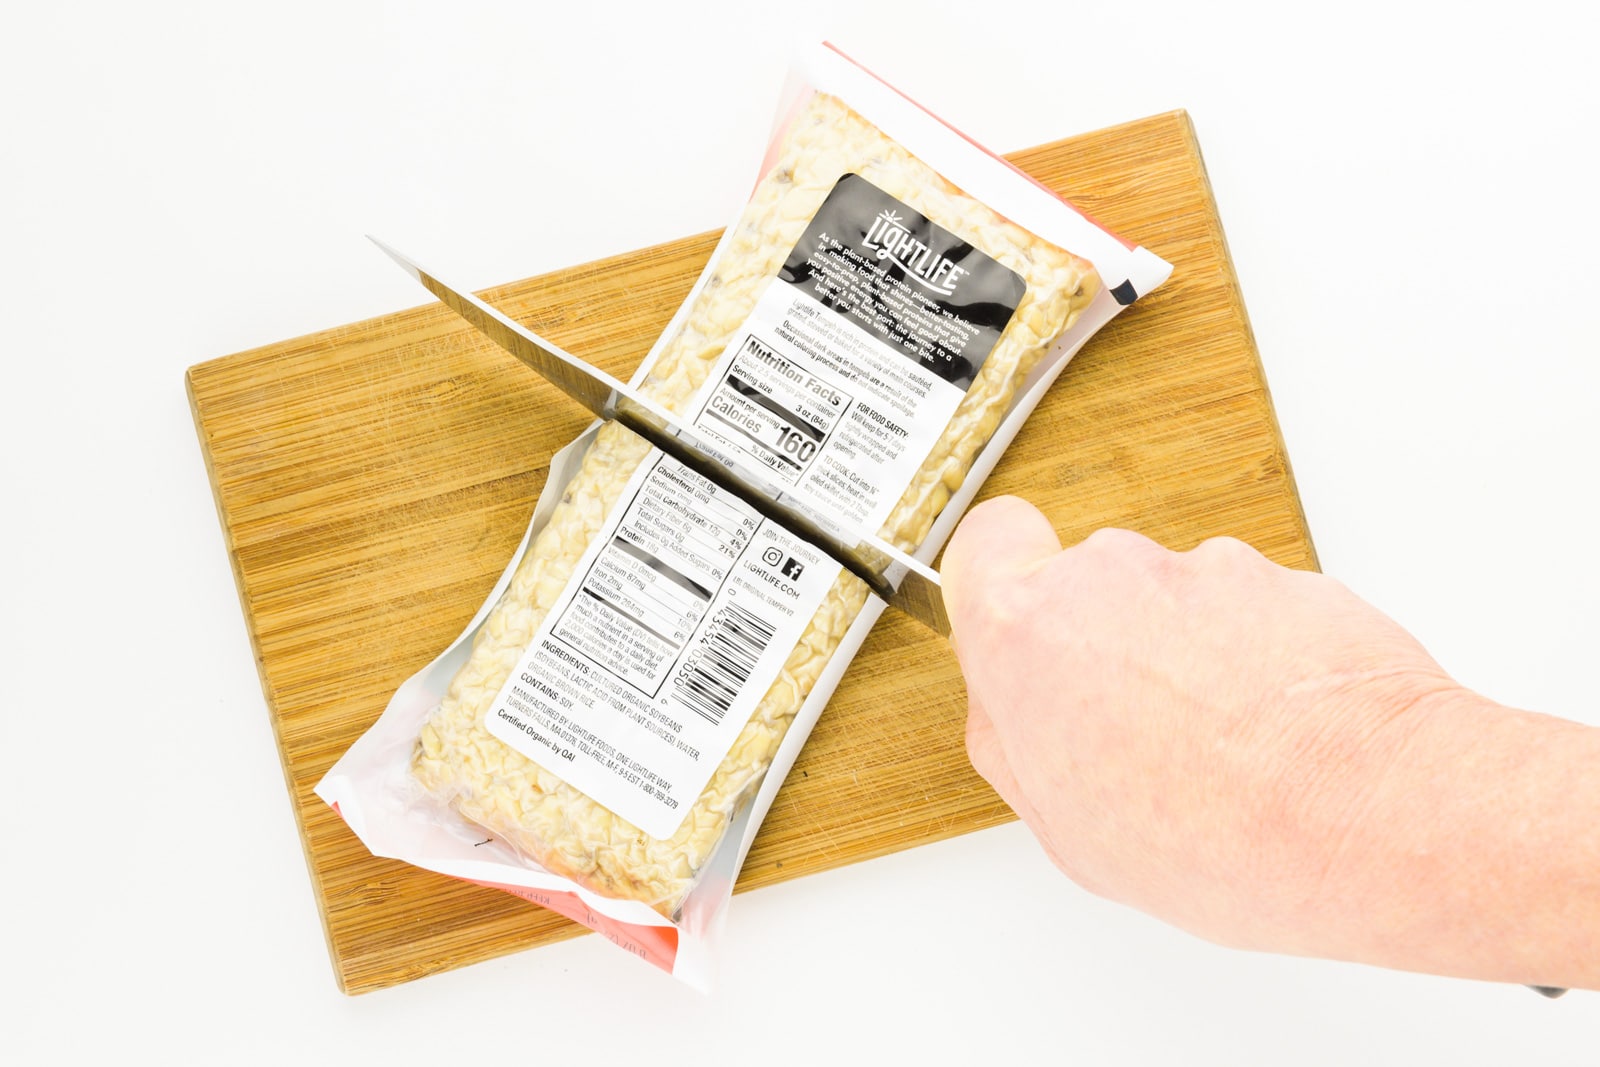 A hand holds a knife, cutting a package of tempeh in half as it sits on a cutting board.